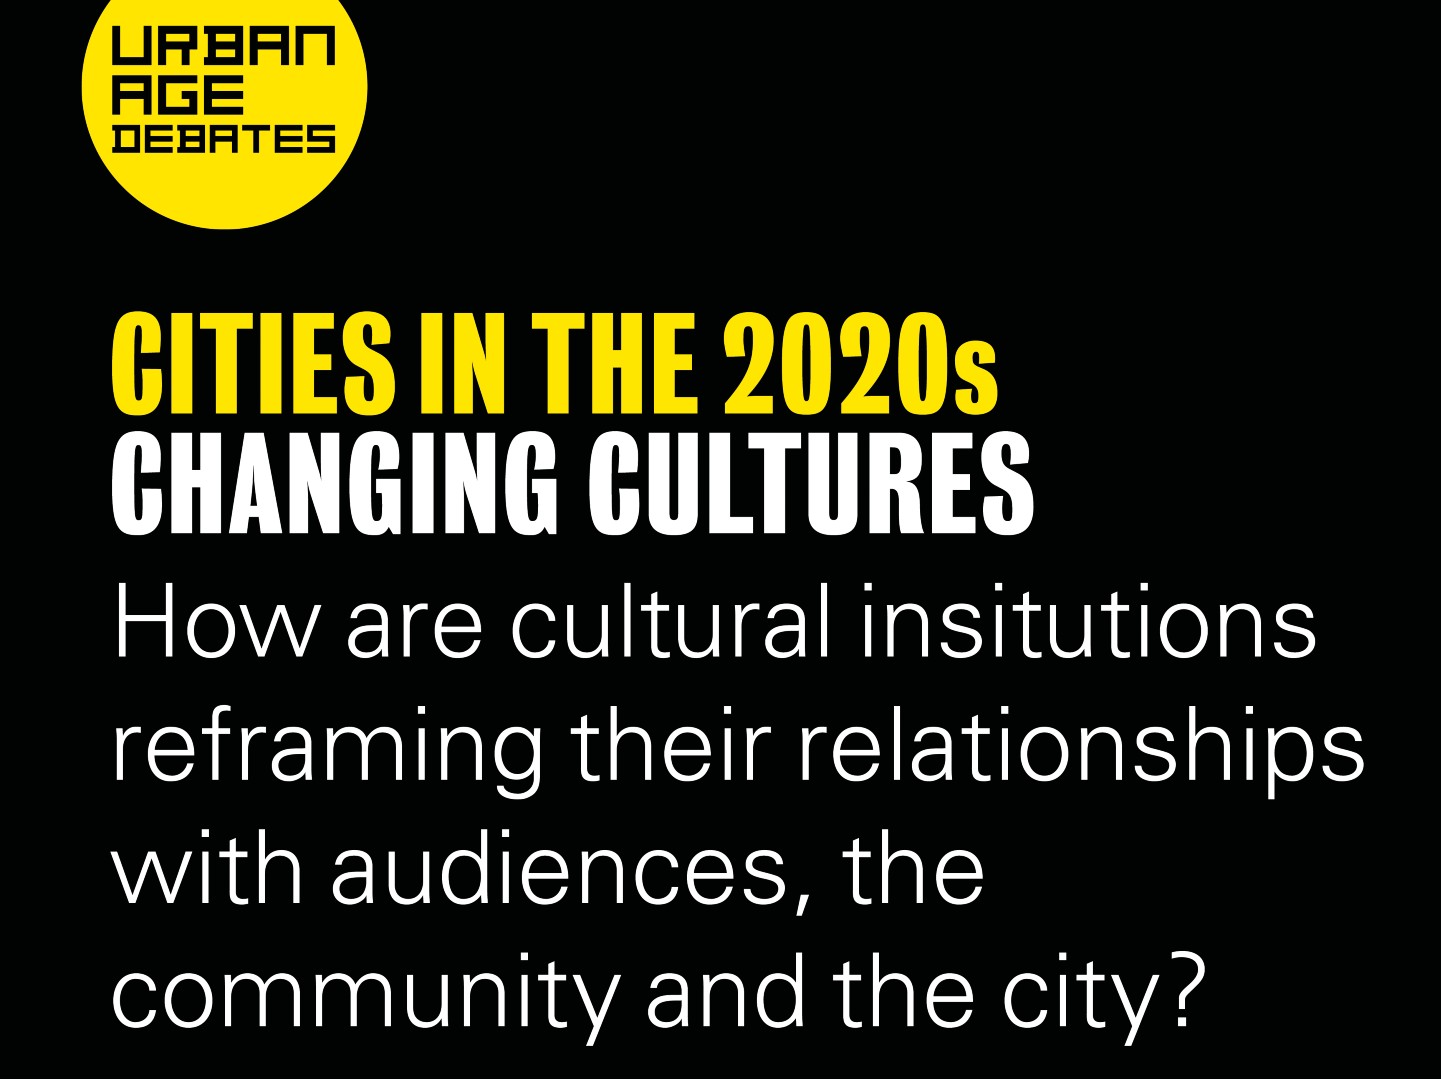 Watch the 'Changing Cultures' Debate here